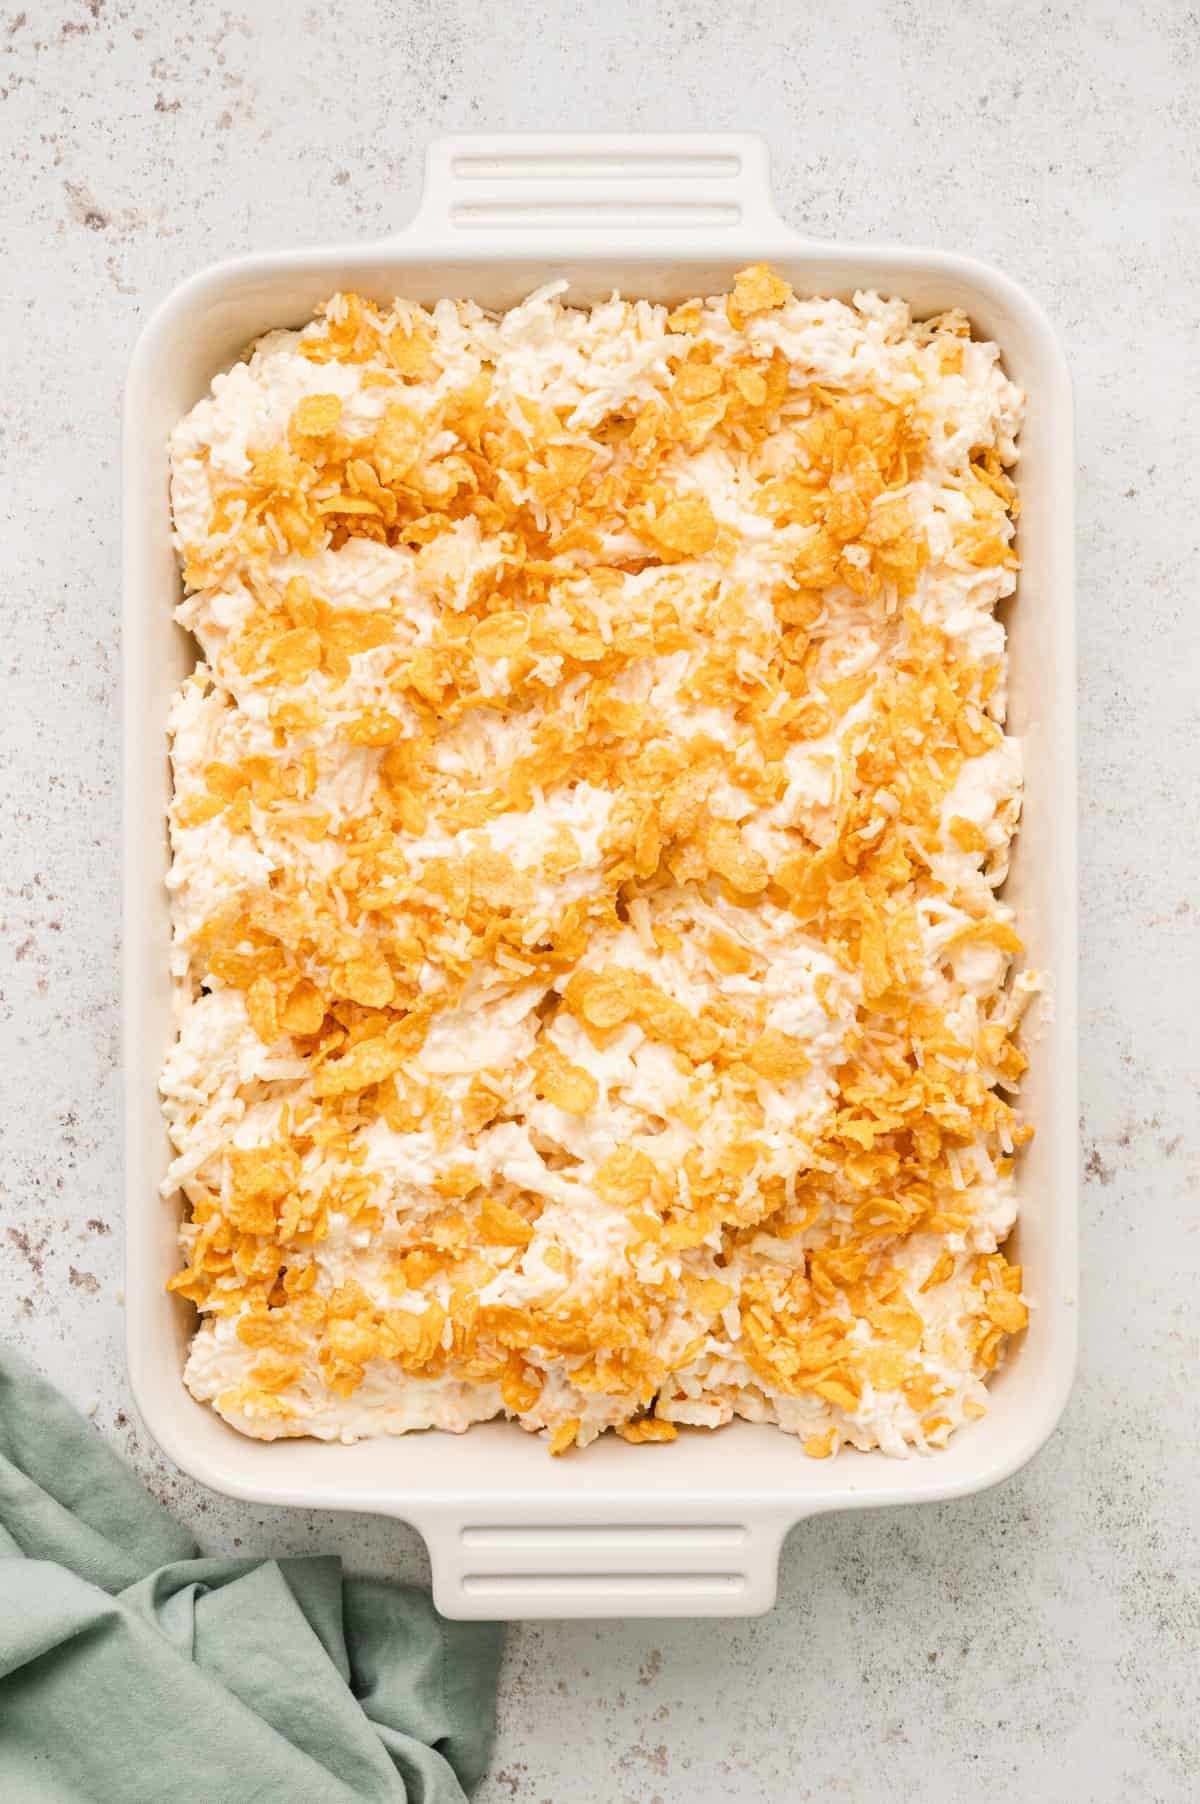 Topping the potato mixture with cornflake combination for Cornflakes, melted butter, and Parmesan cheese in glass mixing for Funeral Potatoes recipe